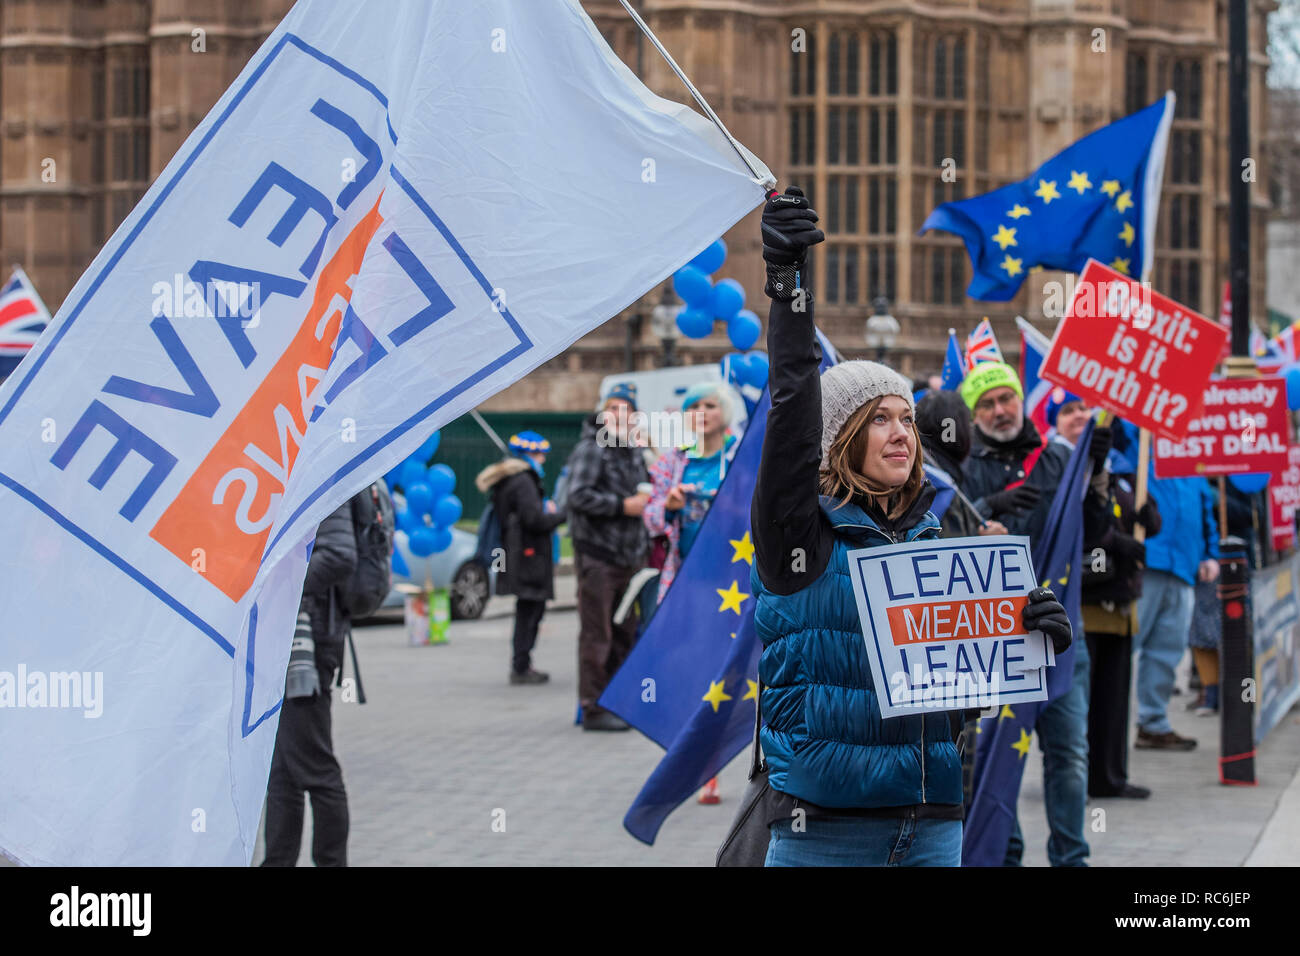 London, UK. 14th January, 2019. A woman, against the increasing centralisation of the EU, is diappointed in Parliament and is frustrated that she feels she has to come and protest against the possibility that the referendum result will be overturned - Leave means leave and SODEM, pro EU, protestors continue to make their points, side by side, outside Parliament as the vote on Theresa May's plan is due the next day. Credit: Guy Bell/Alamy Live News Stock Photo